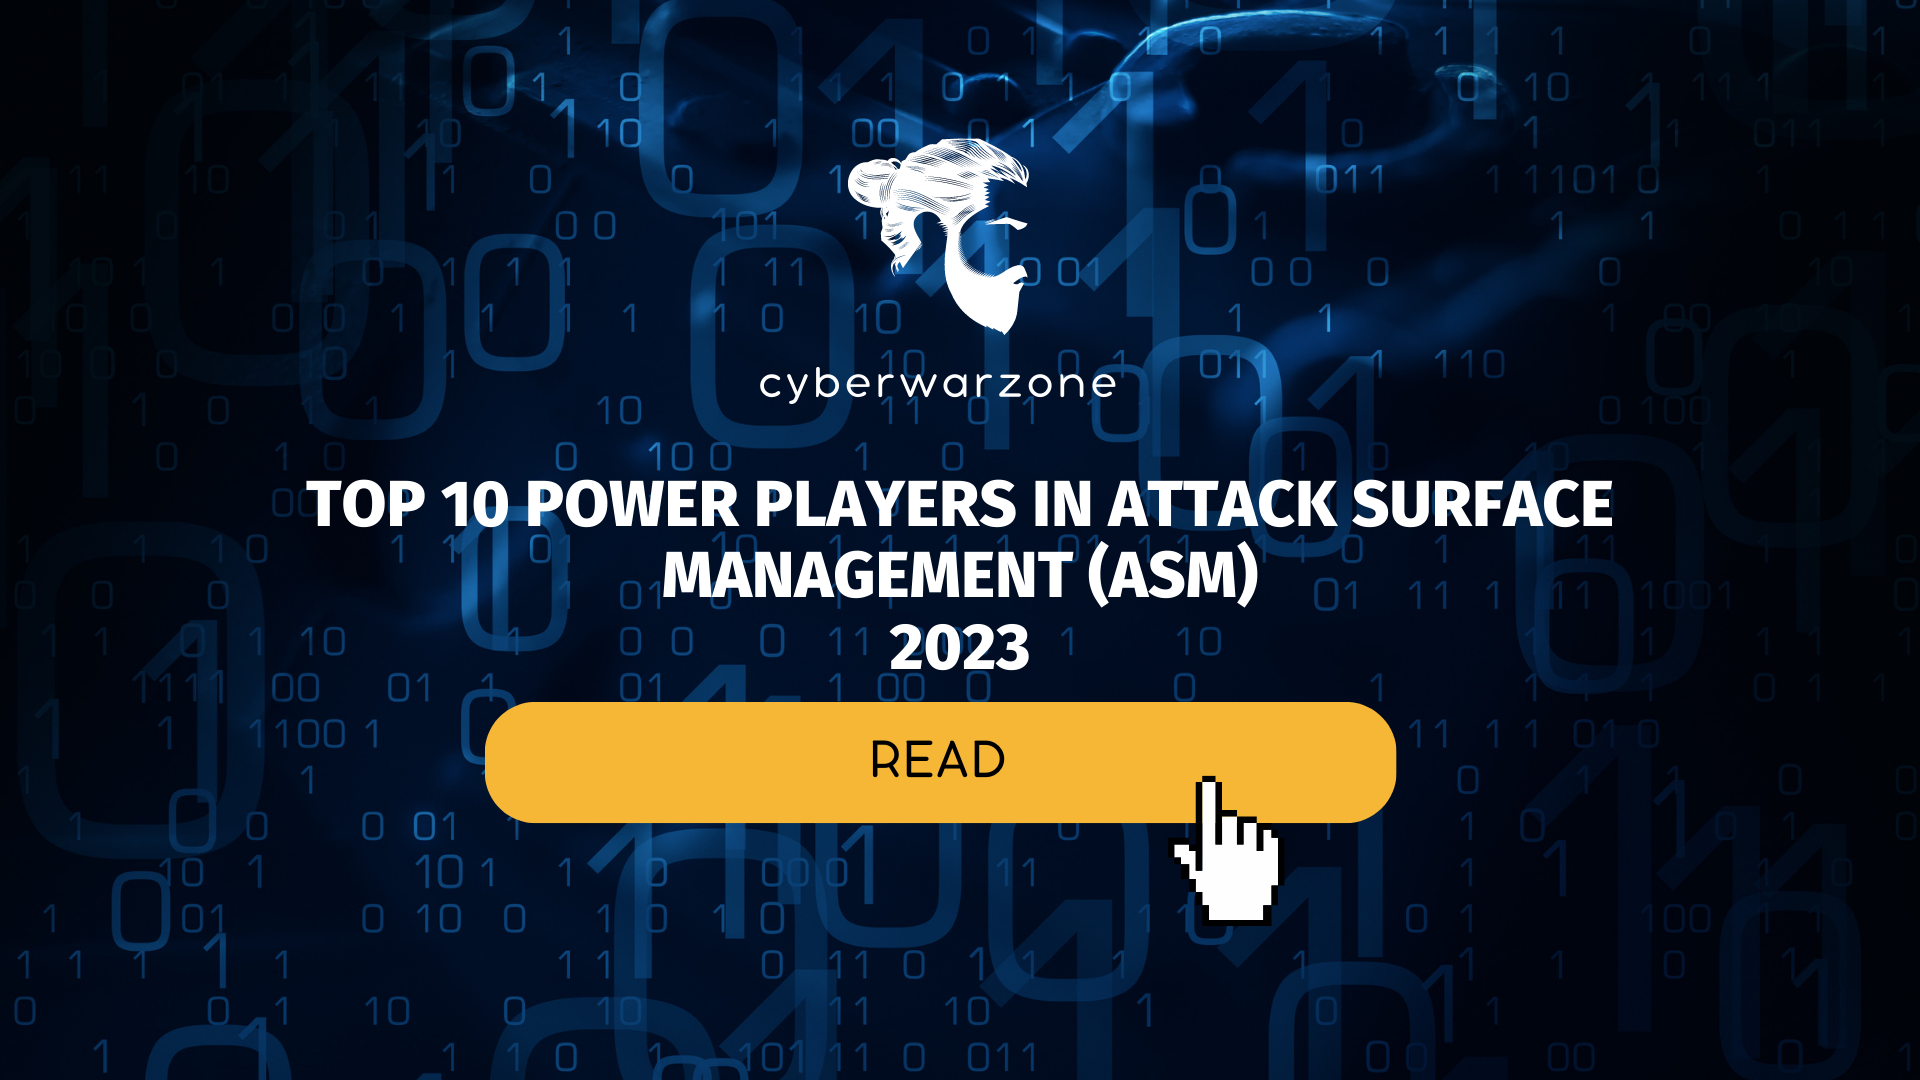 Top 10 Power Players in Attack Surface Management (ASM)